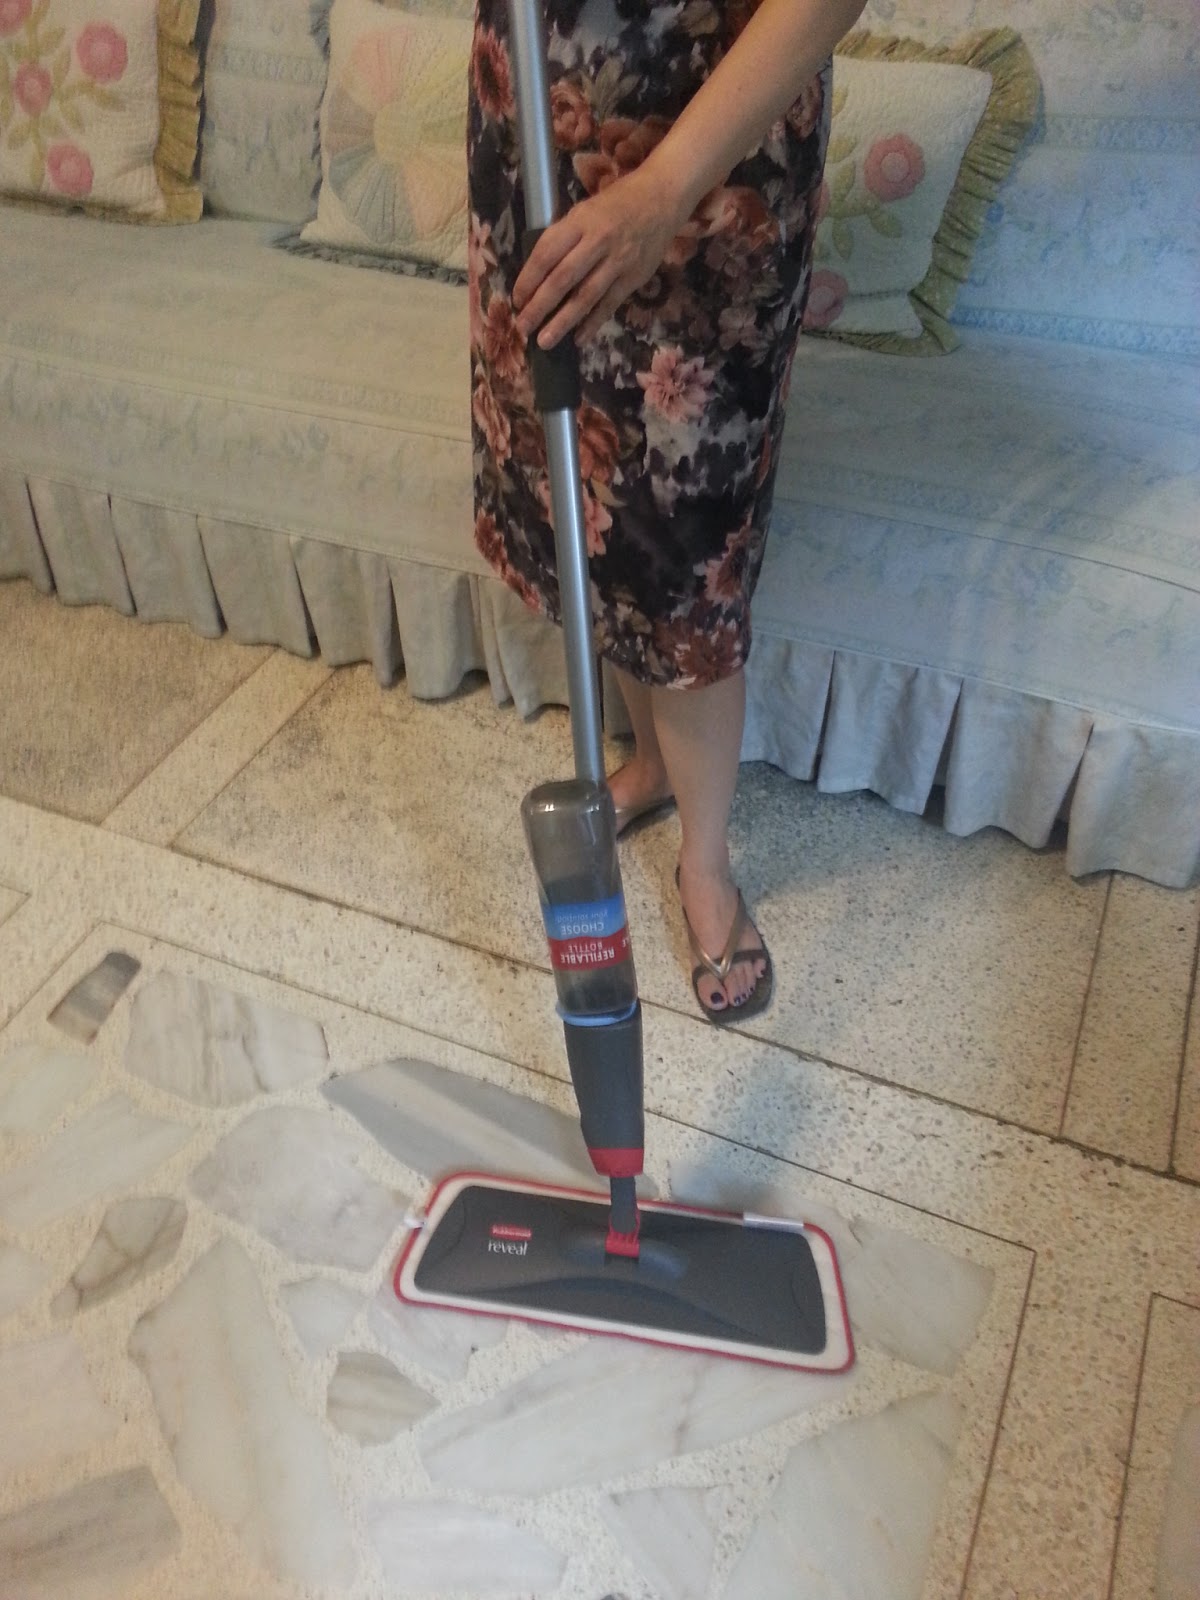 The Philippine Beat: Review: Cleaning with the Rubbermaid Reveal Spray Mop